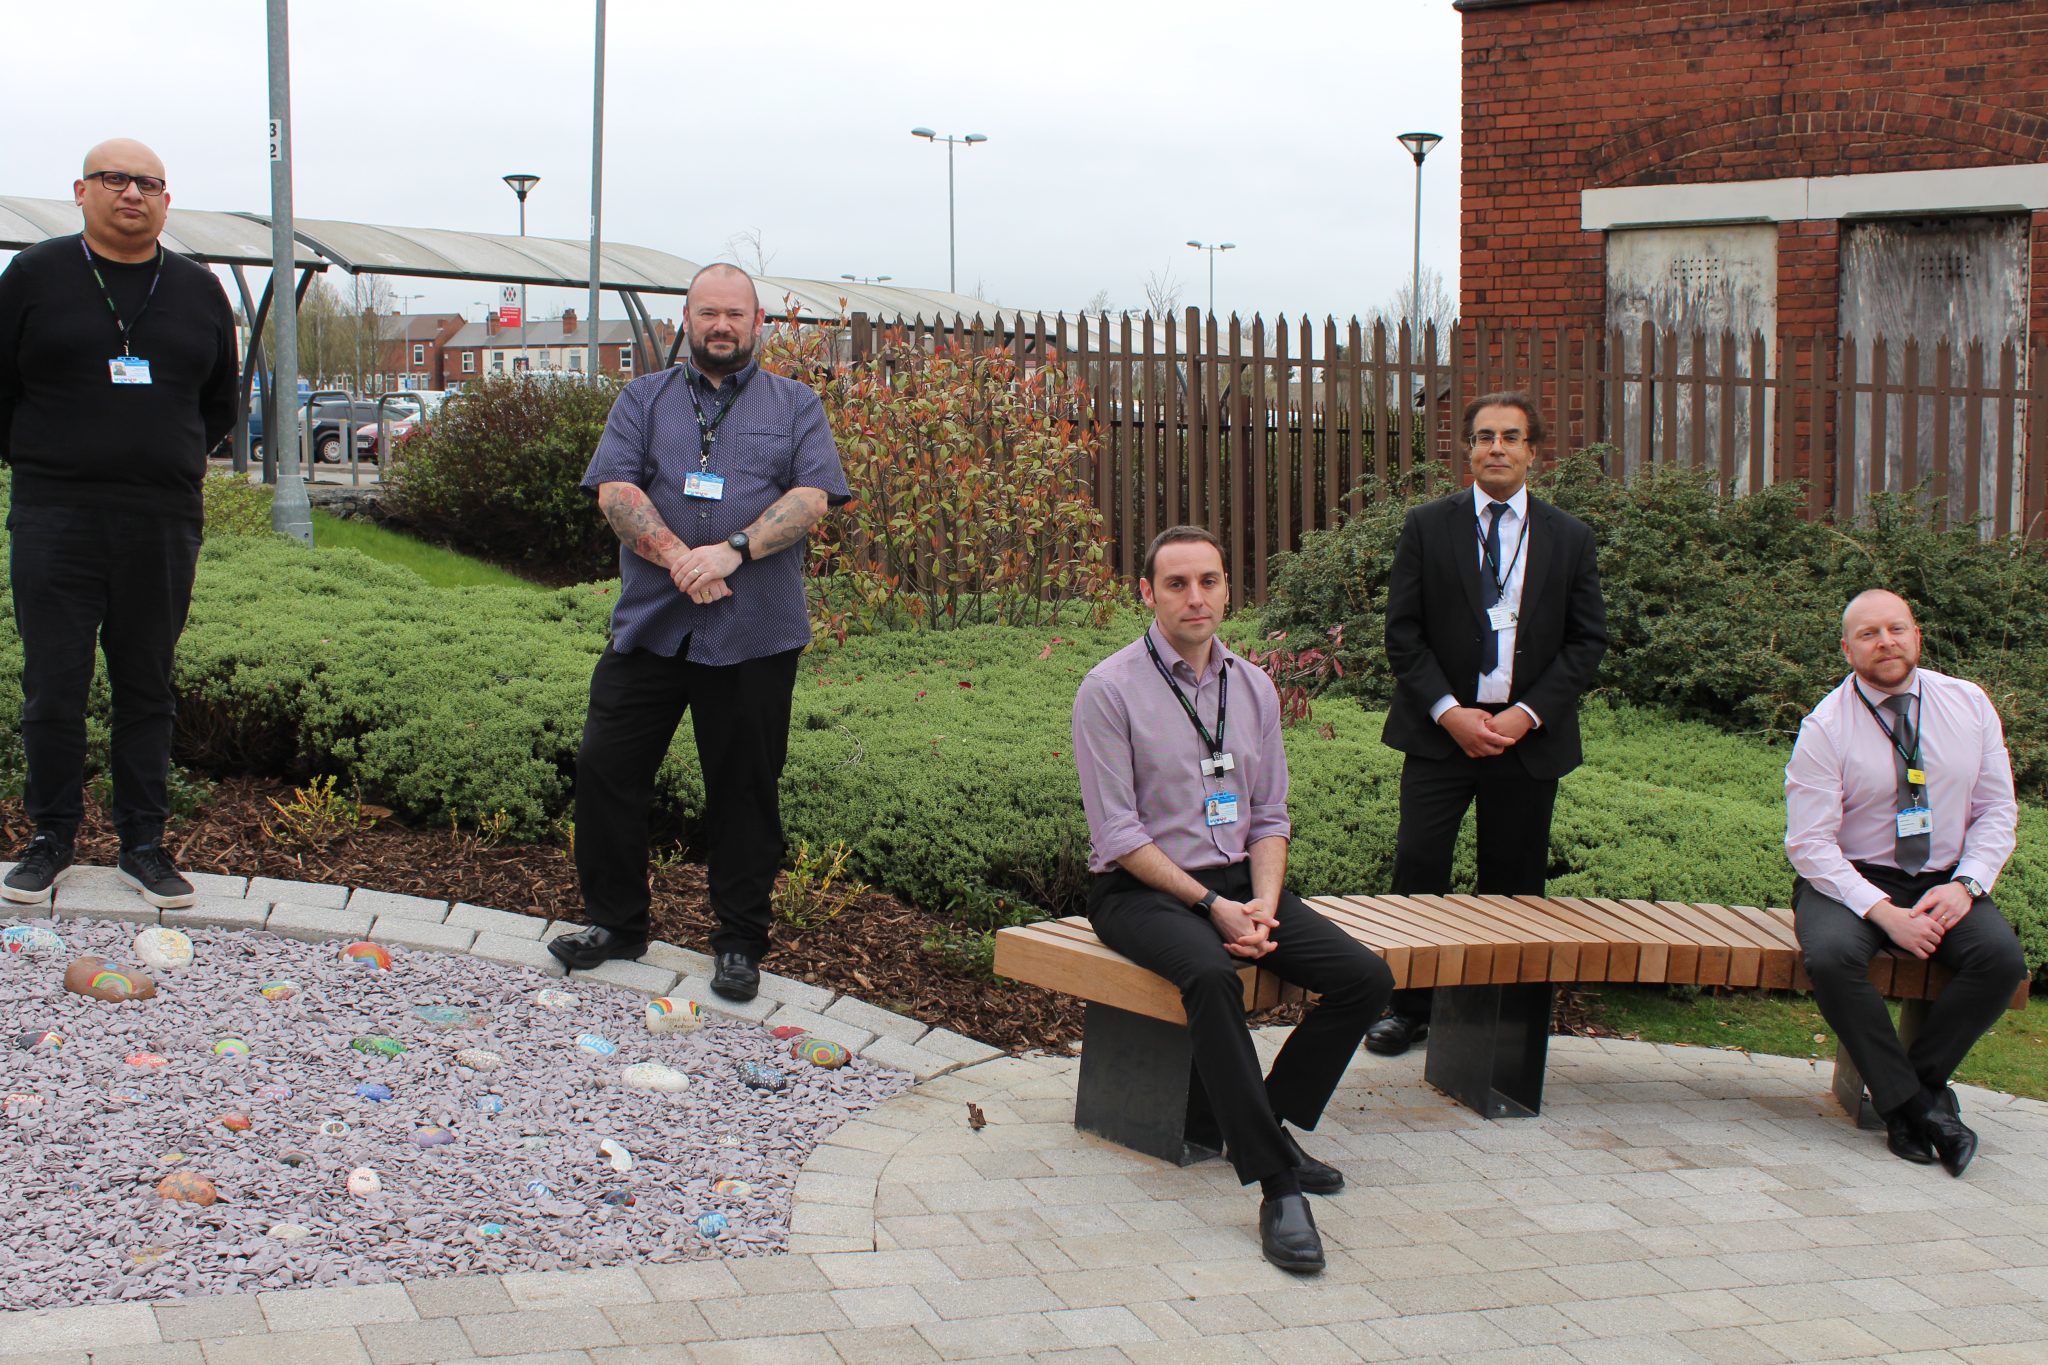 Colleagues visit the special garden created for reflection